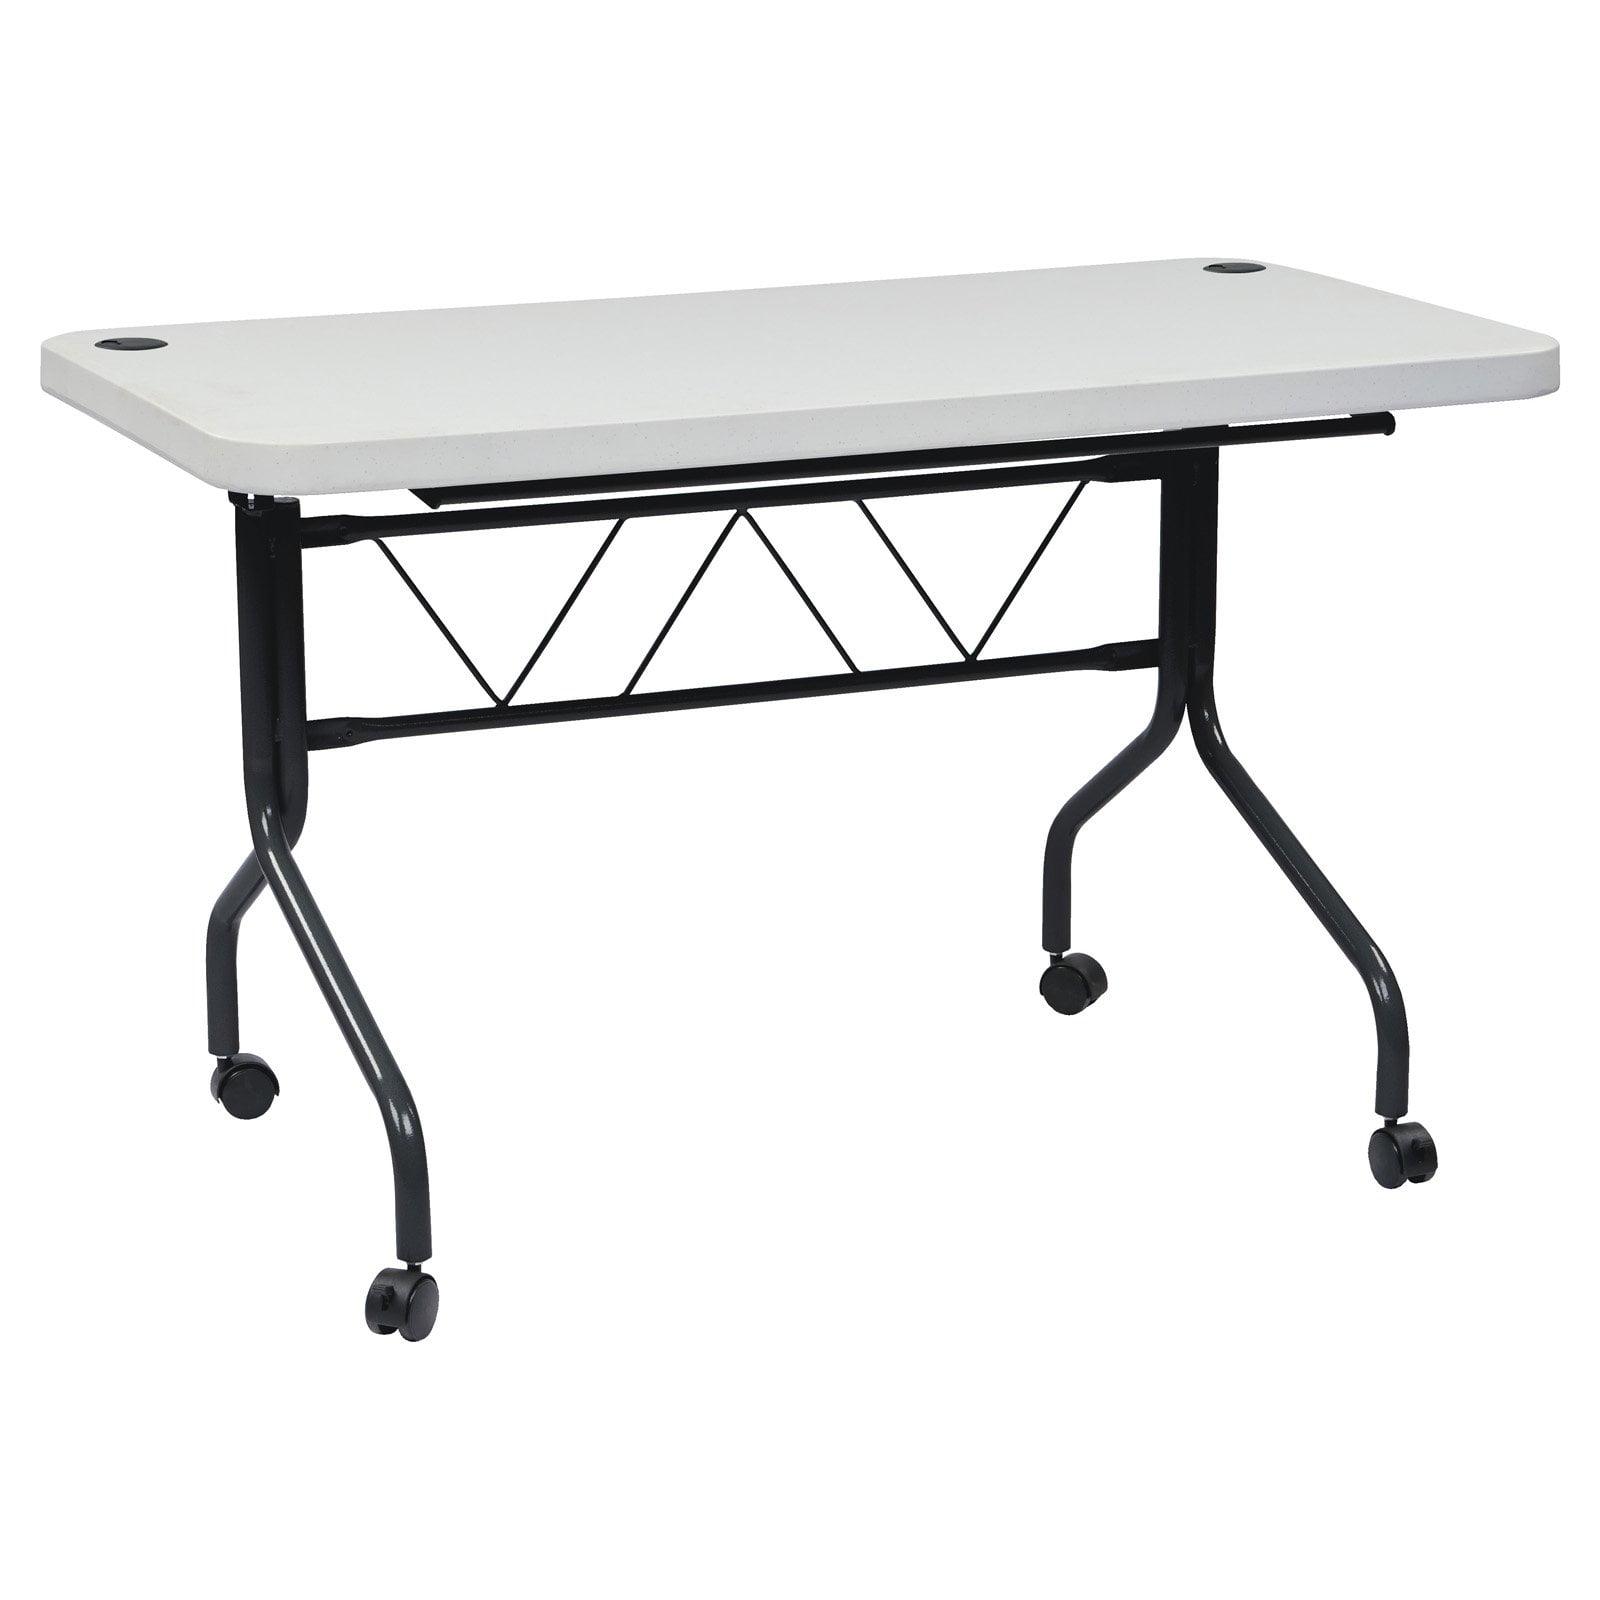 Contemporary 4' Grey Resin Flip-Top Table with Black Steel Frame